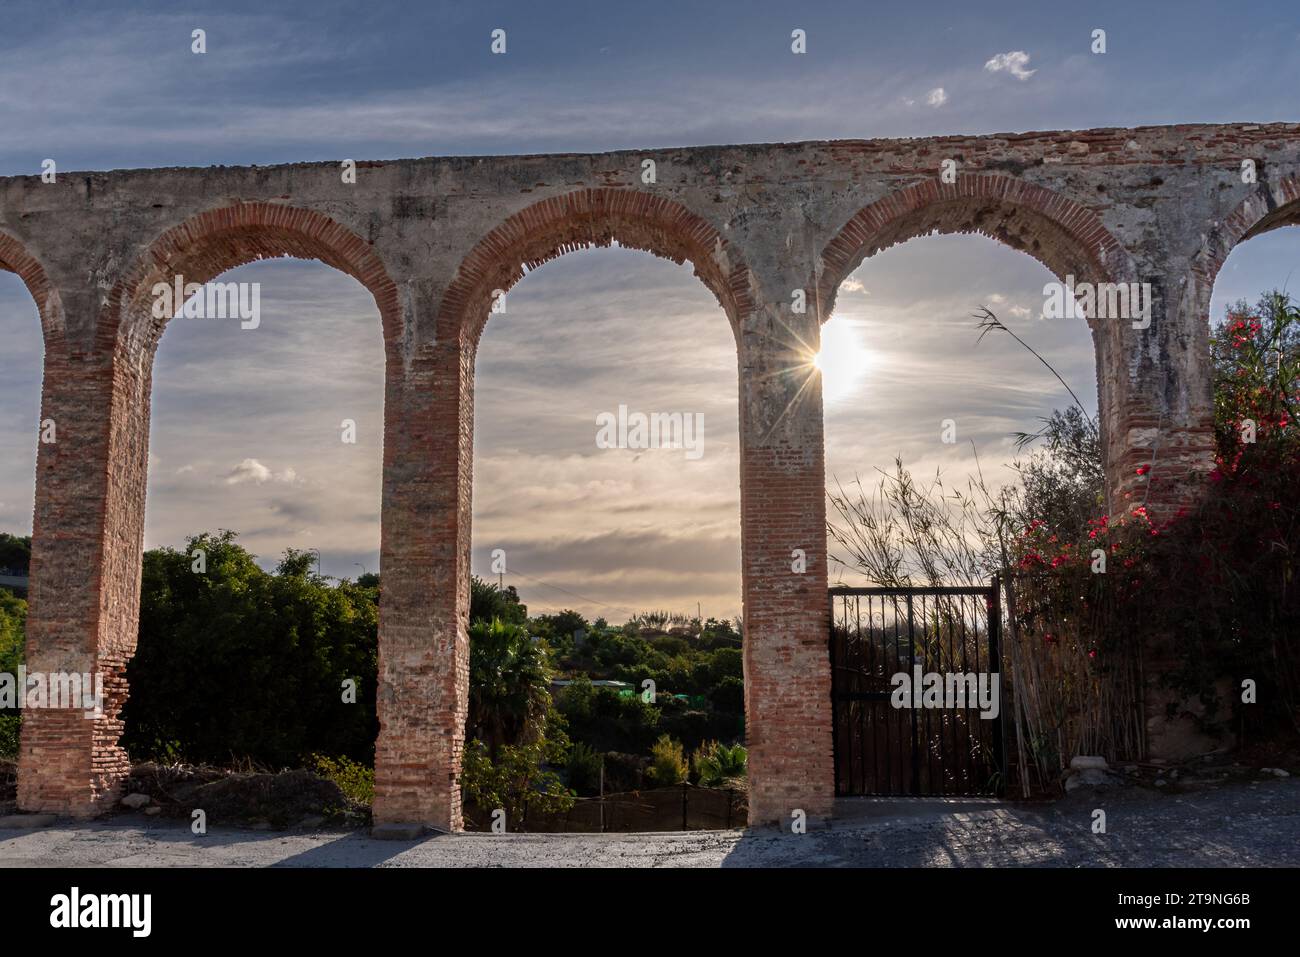 Tablazo or iron water aqueduct in the town of Nerja in a dilapidated state. Stock Photo